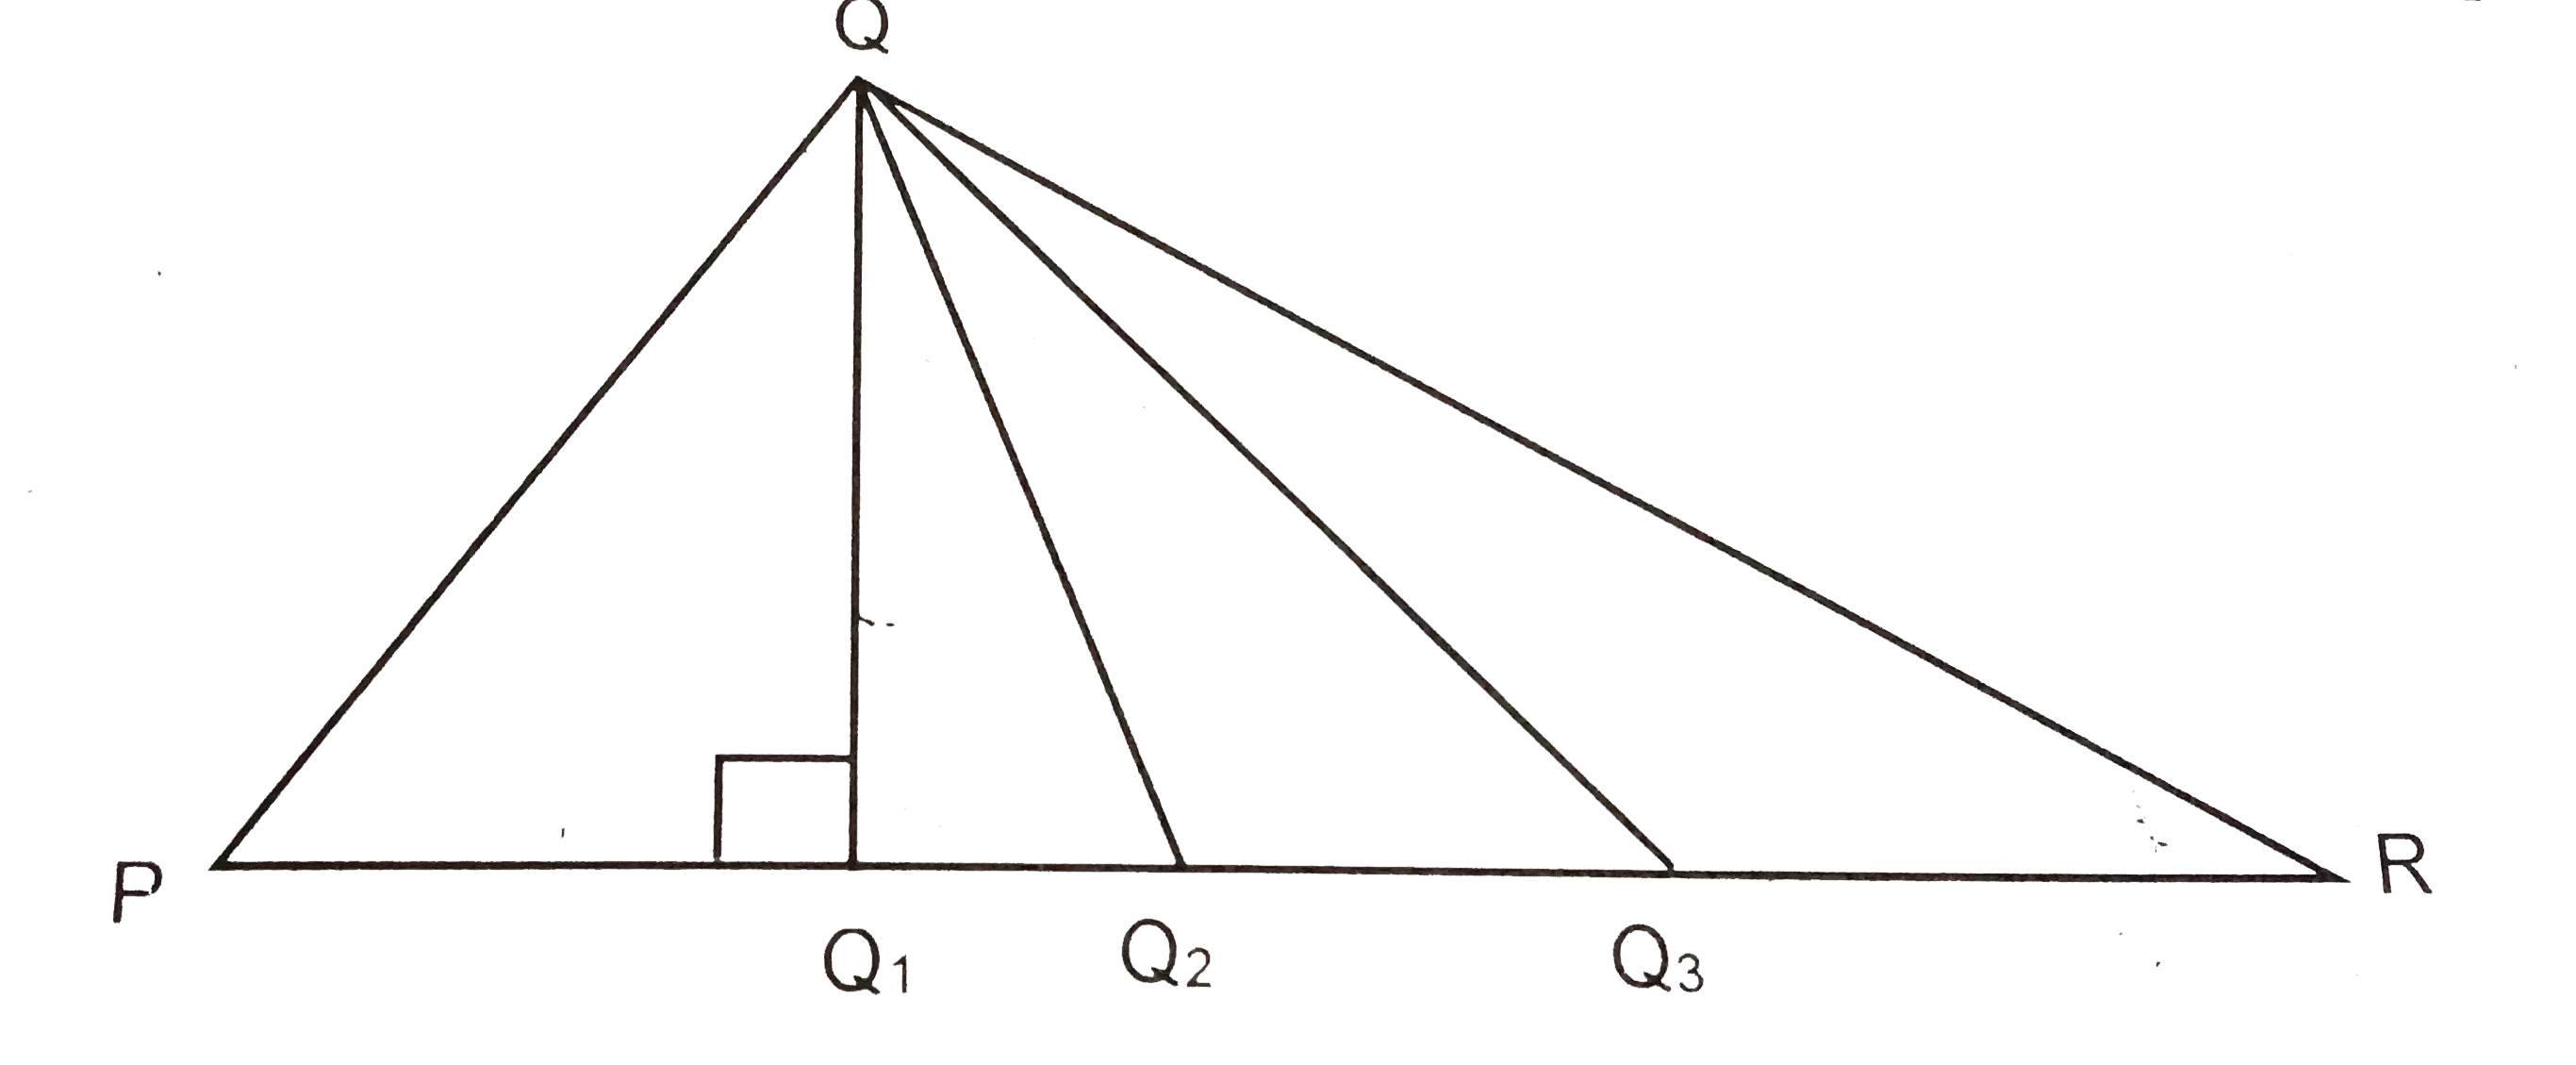 Let PQR be am acute-angled triangle in which PQ lt QR. From the vertex Q draw altitude QQ(1),  the angle bisector Q Q(2) and the medianQ Q(3)